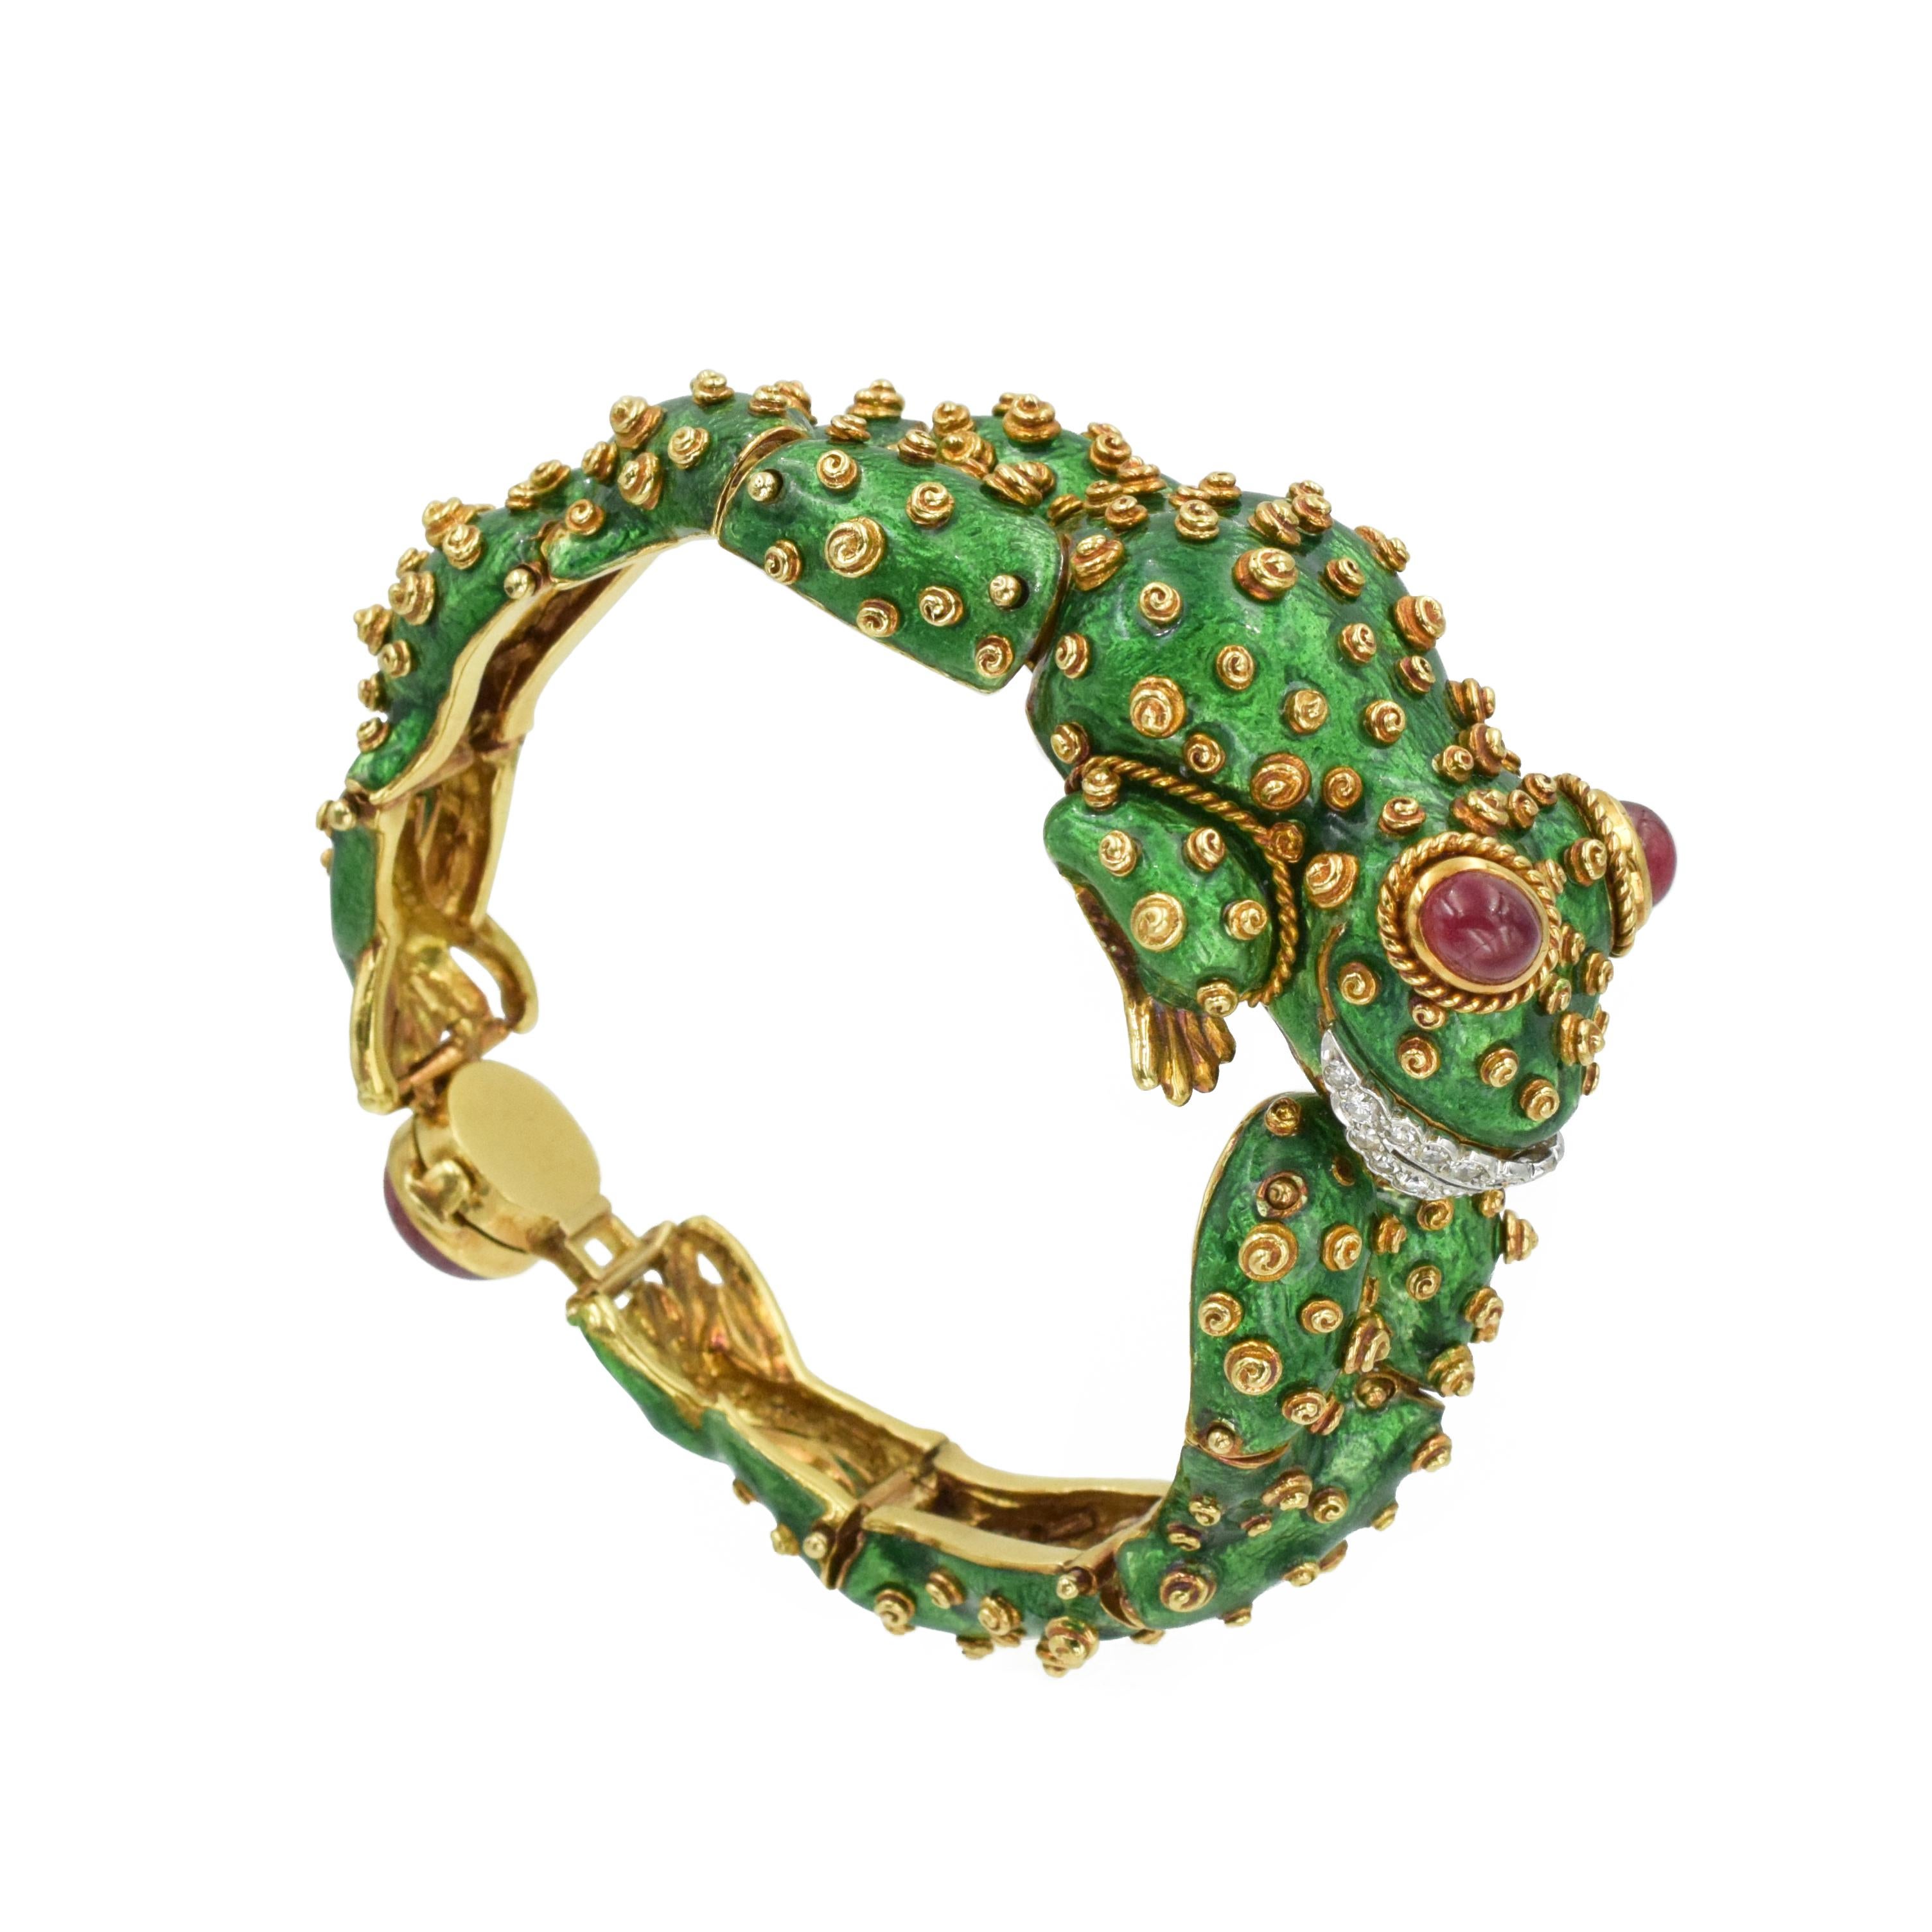 David Webb Green Enamel Frog Bracelet.  Set with 2 oval cabochon cut rubies
 and and one round cabochon cut ruby  weighing total of approximately 6.0carats, and 22 brilliant round
diamonds with an approximate total weight of 0.50carats
 Color G/H,